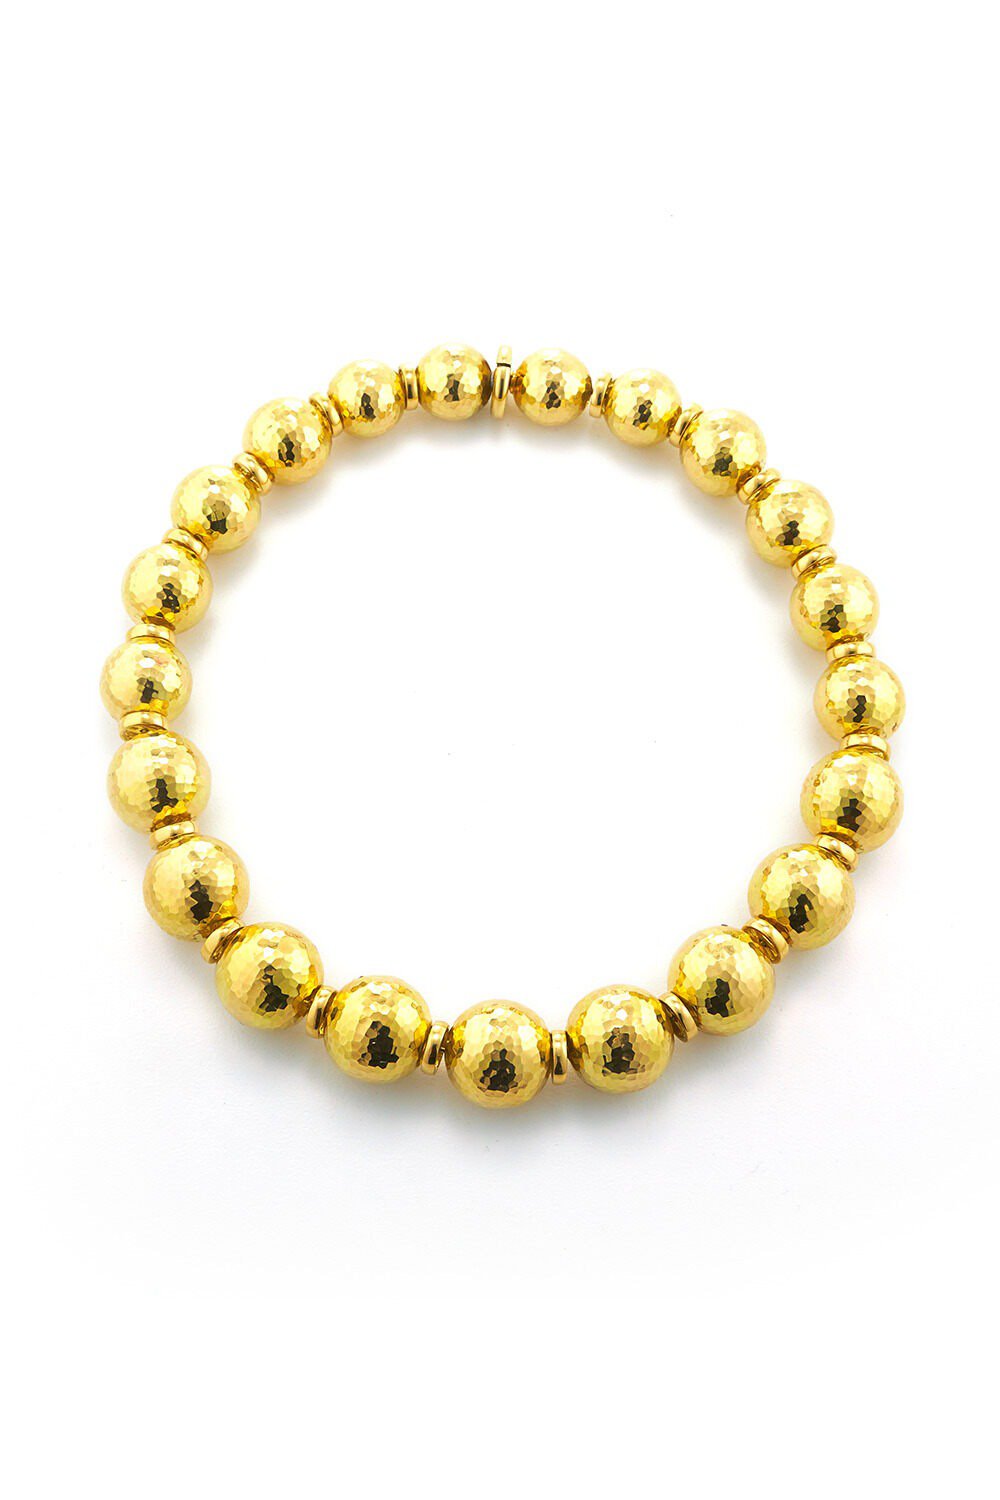 DAVID WEBB-Hammered Disco Ball Bail Necklace-YELLOW GOLD